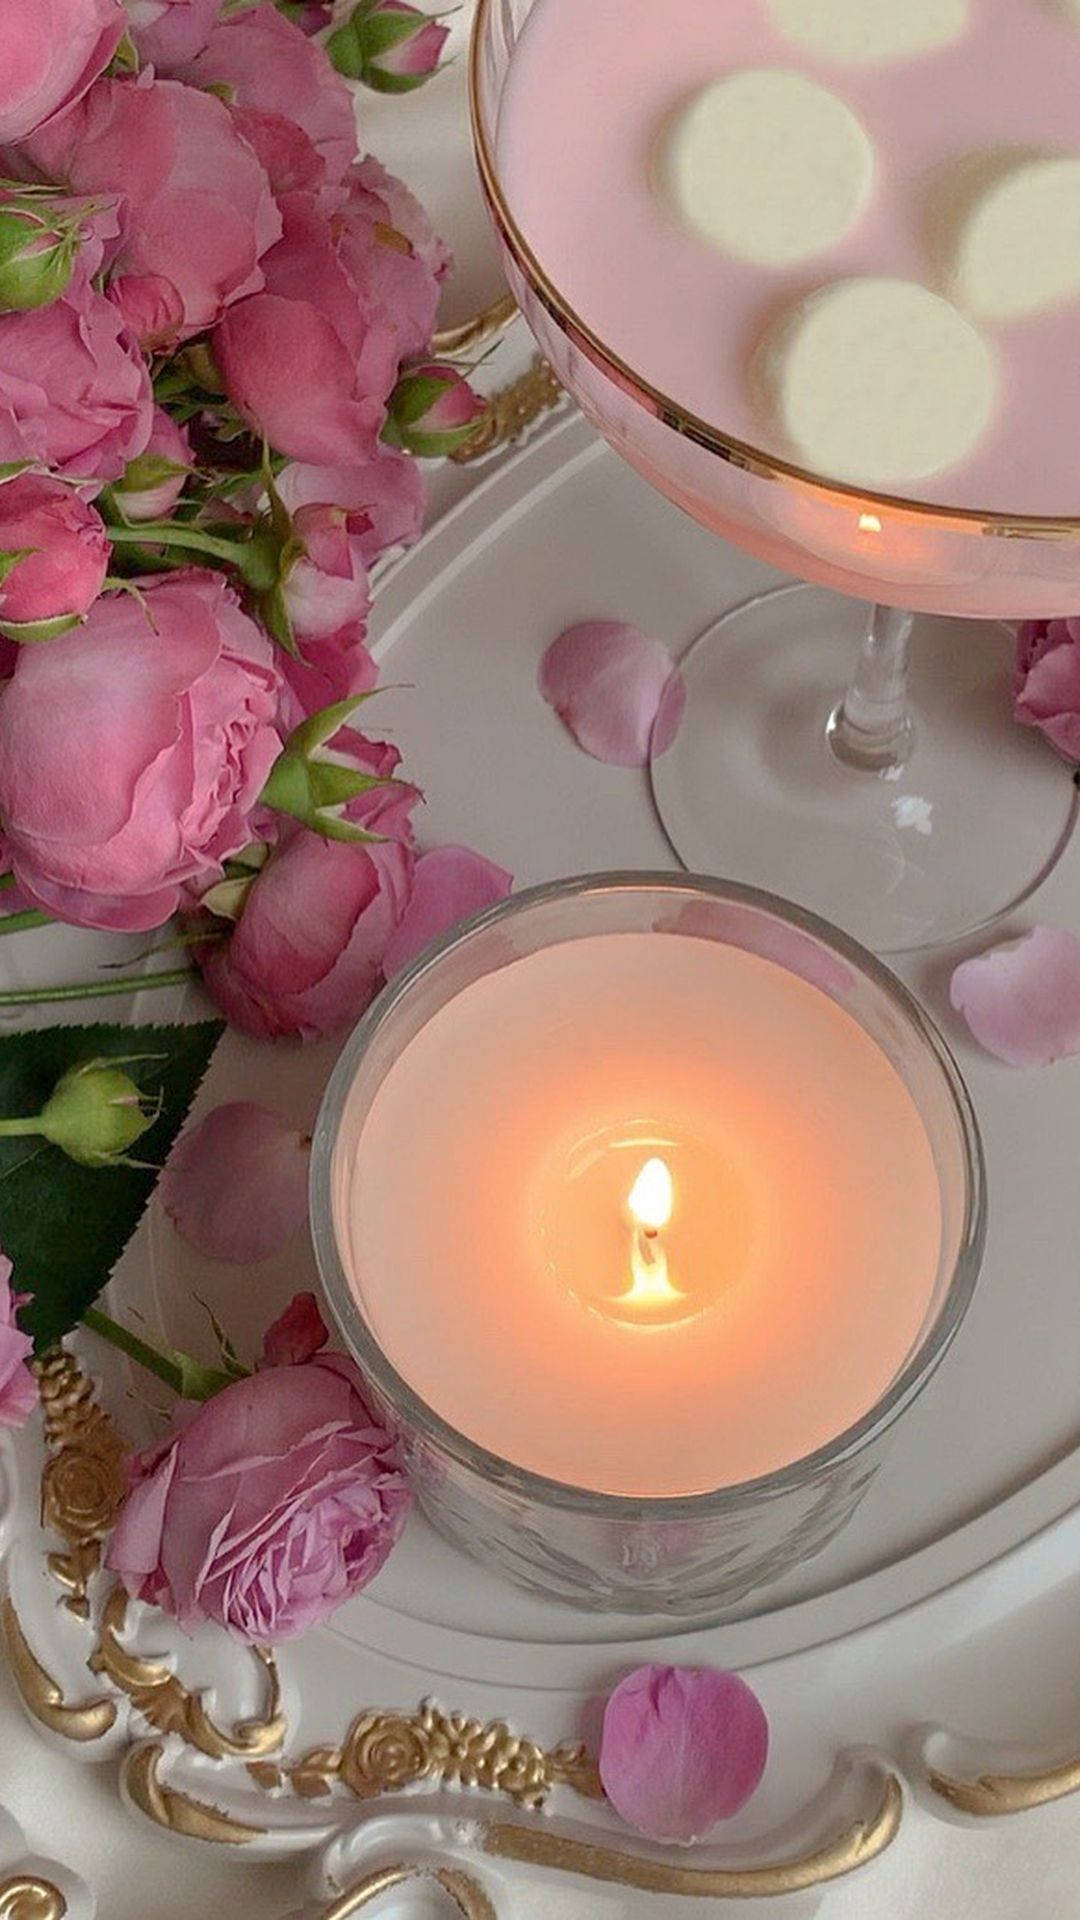 128243 Flowers, 4K, Candles - Rare Gallery HD Wallpapers